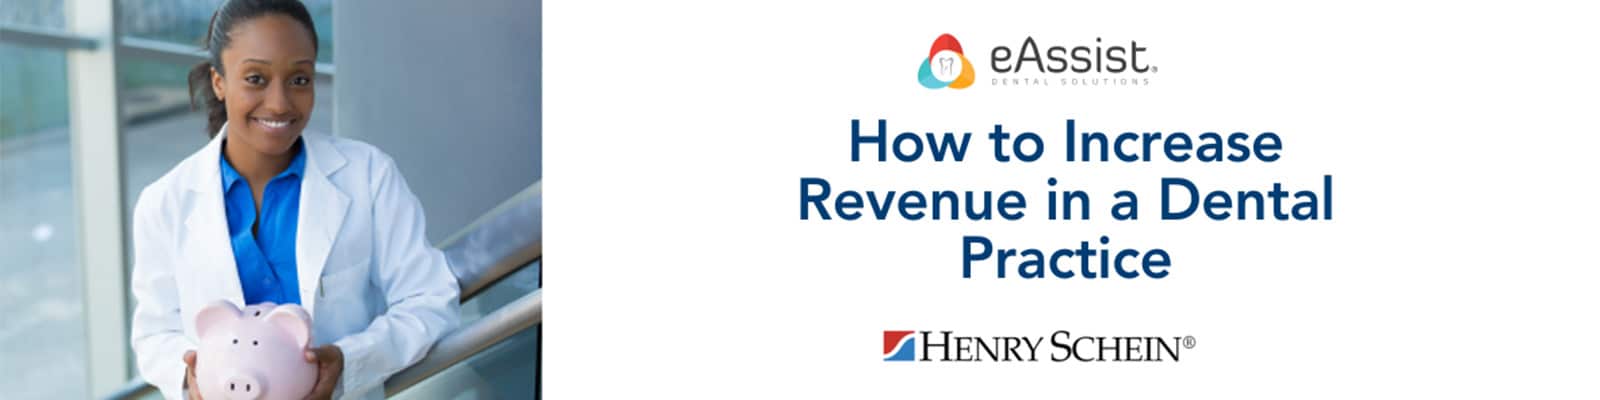 How to Increase Revenue in a Dental Practice